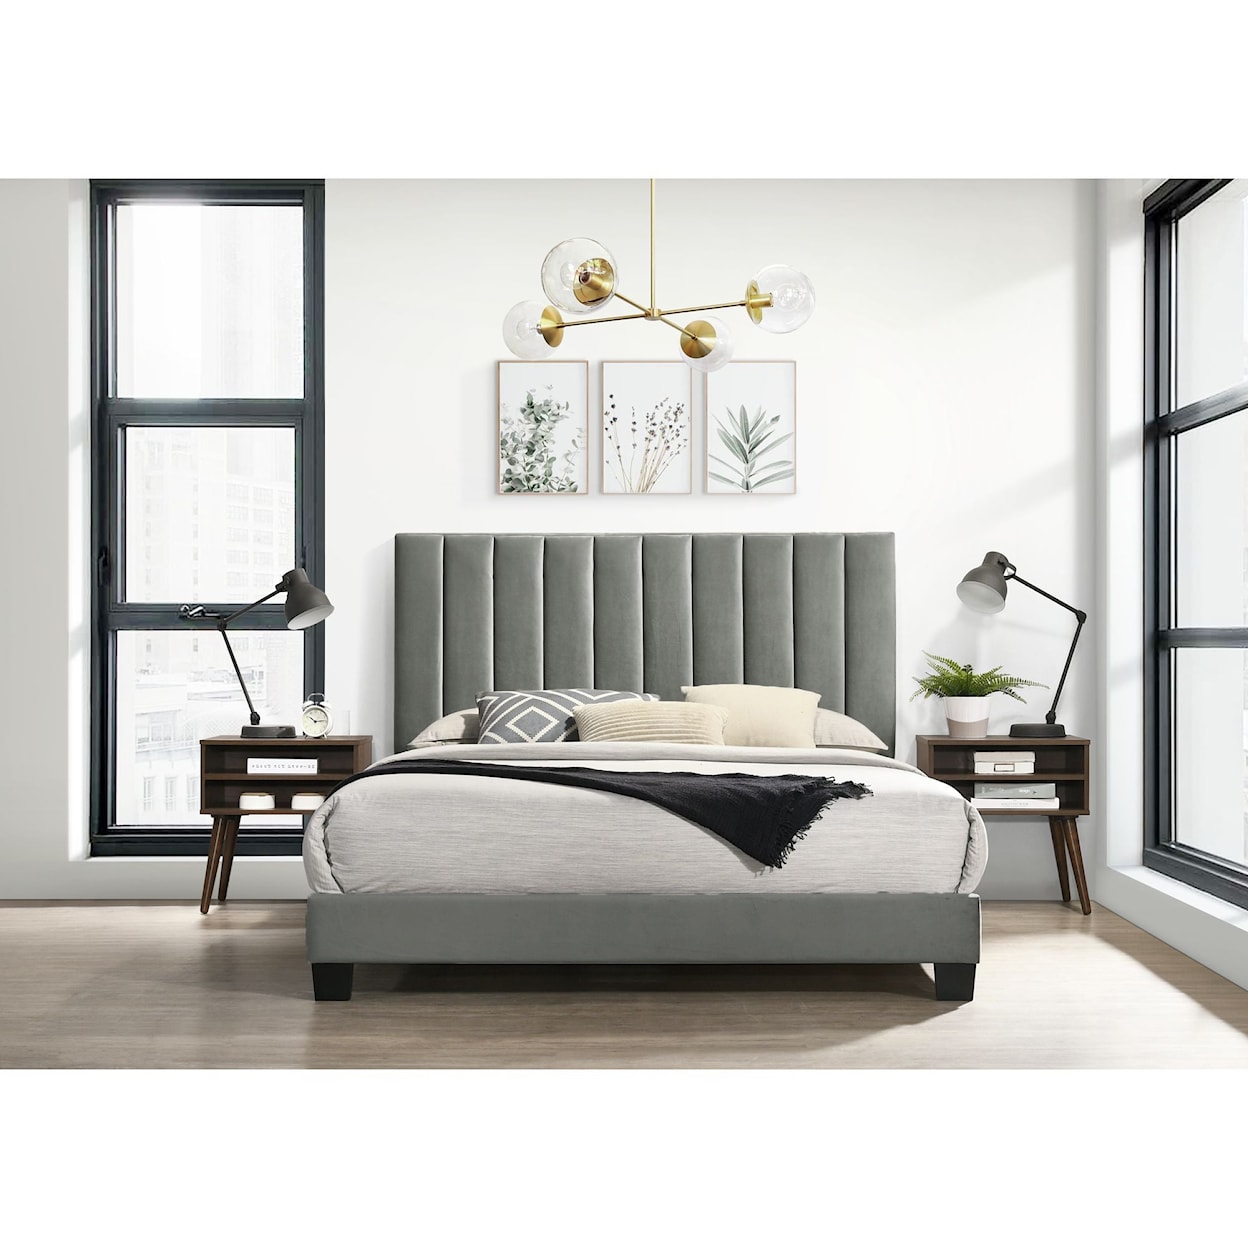 Elements International Coyote Carroll Grey Upholstered Bed